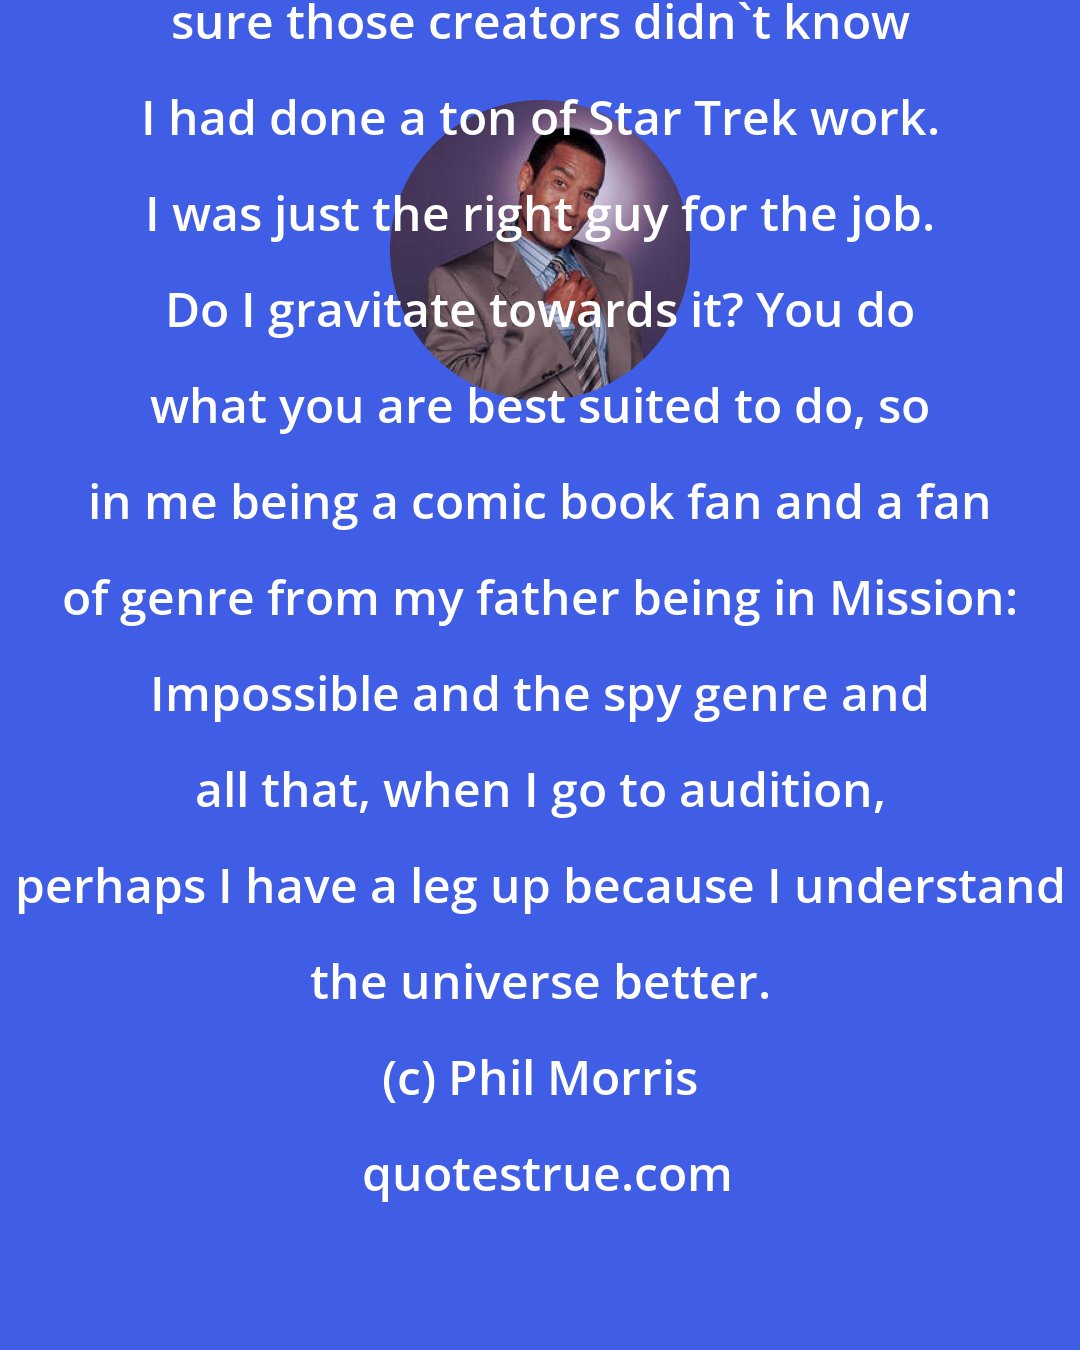 Phil Morris: It's like with Smallville, I'm sure those creators didn't know I had done a ton of Star Trek work. I was just the right guy for the job. Do I gravitate towards it? You do what you are best suited to do, so in me being a comic book fan and a fan of genre from my father being in Mission: Impossible and the spy genre and all that, when I go to audition, perhaps I have a leg up because I understand the universe better.